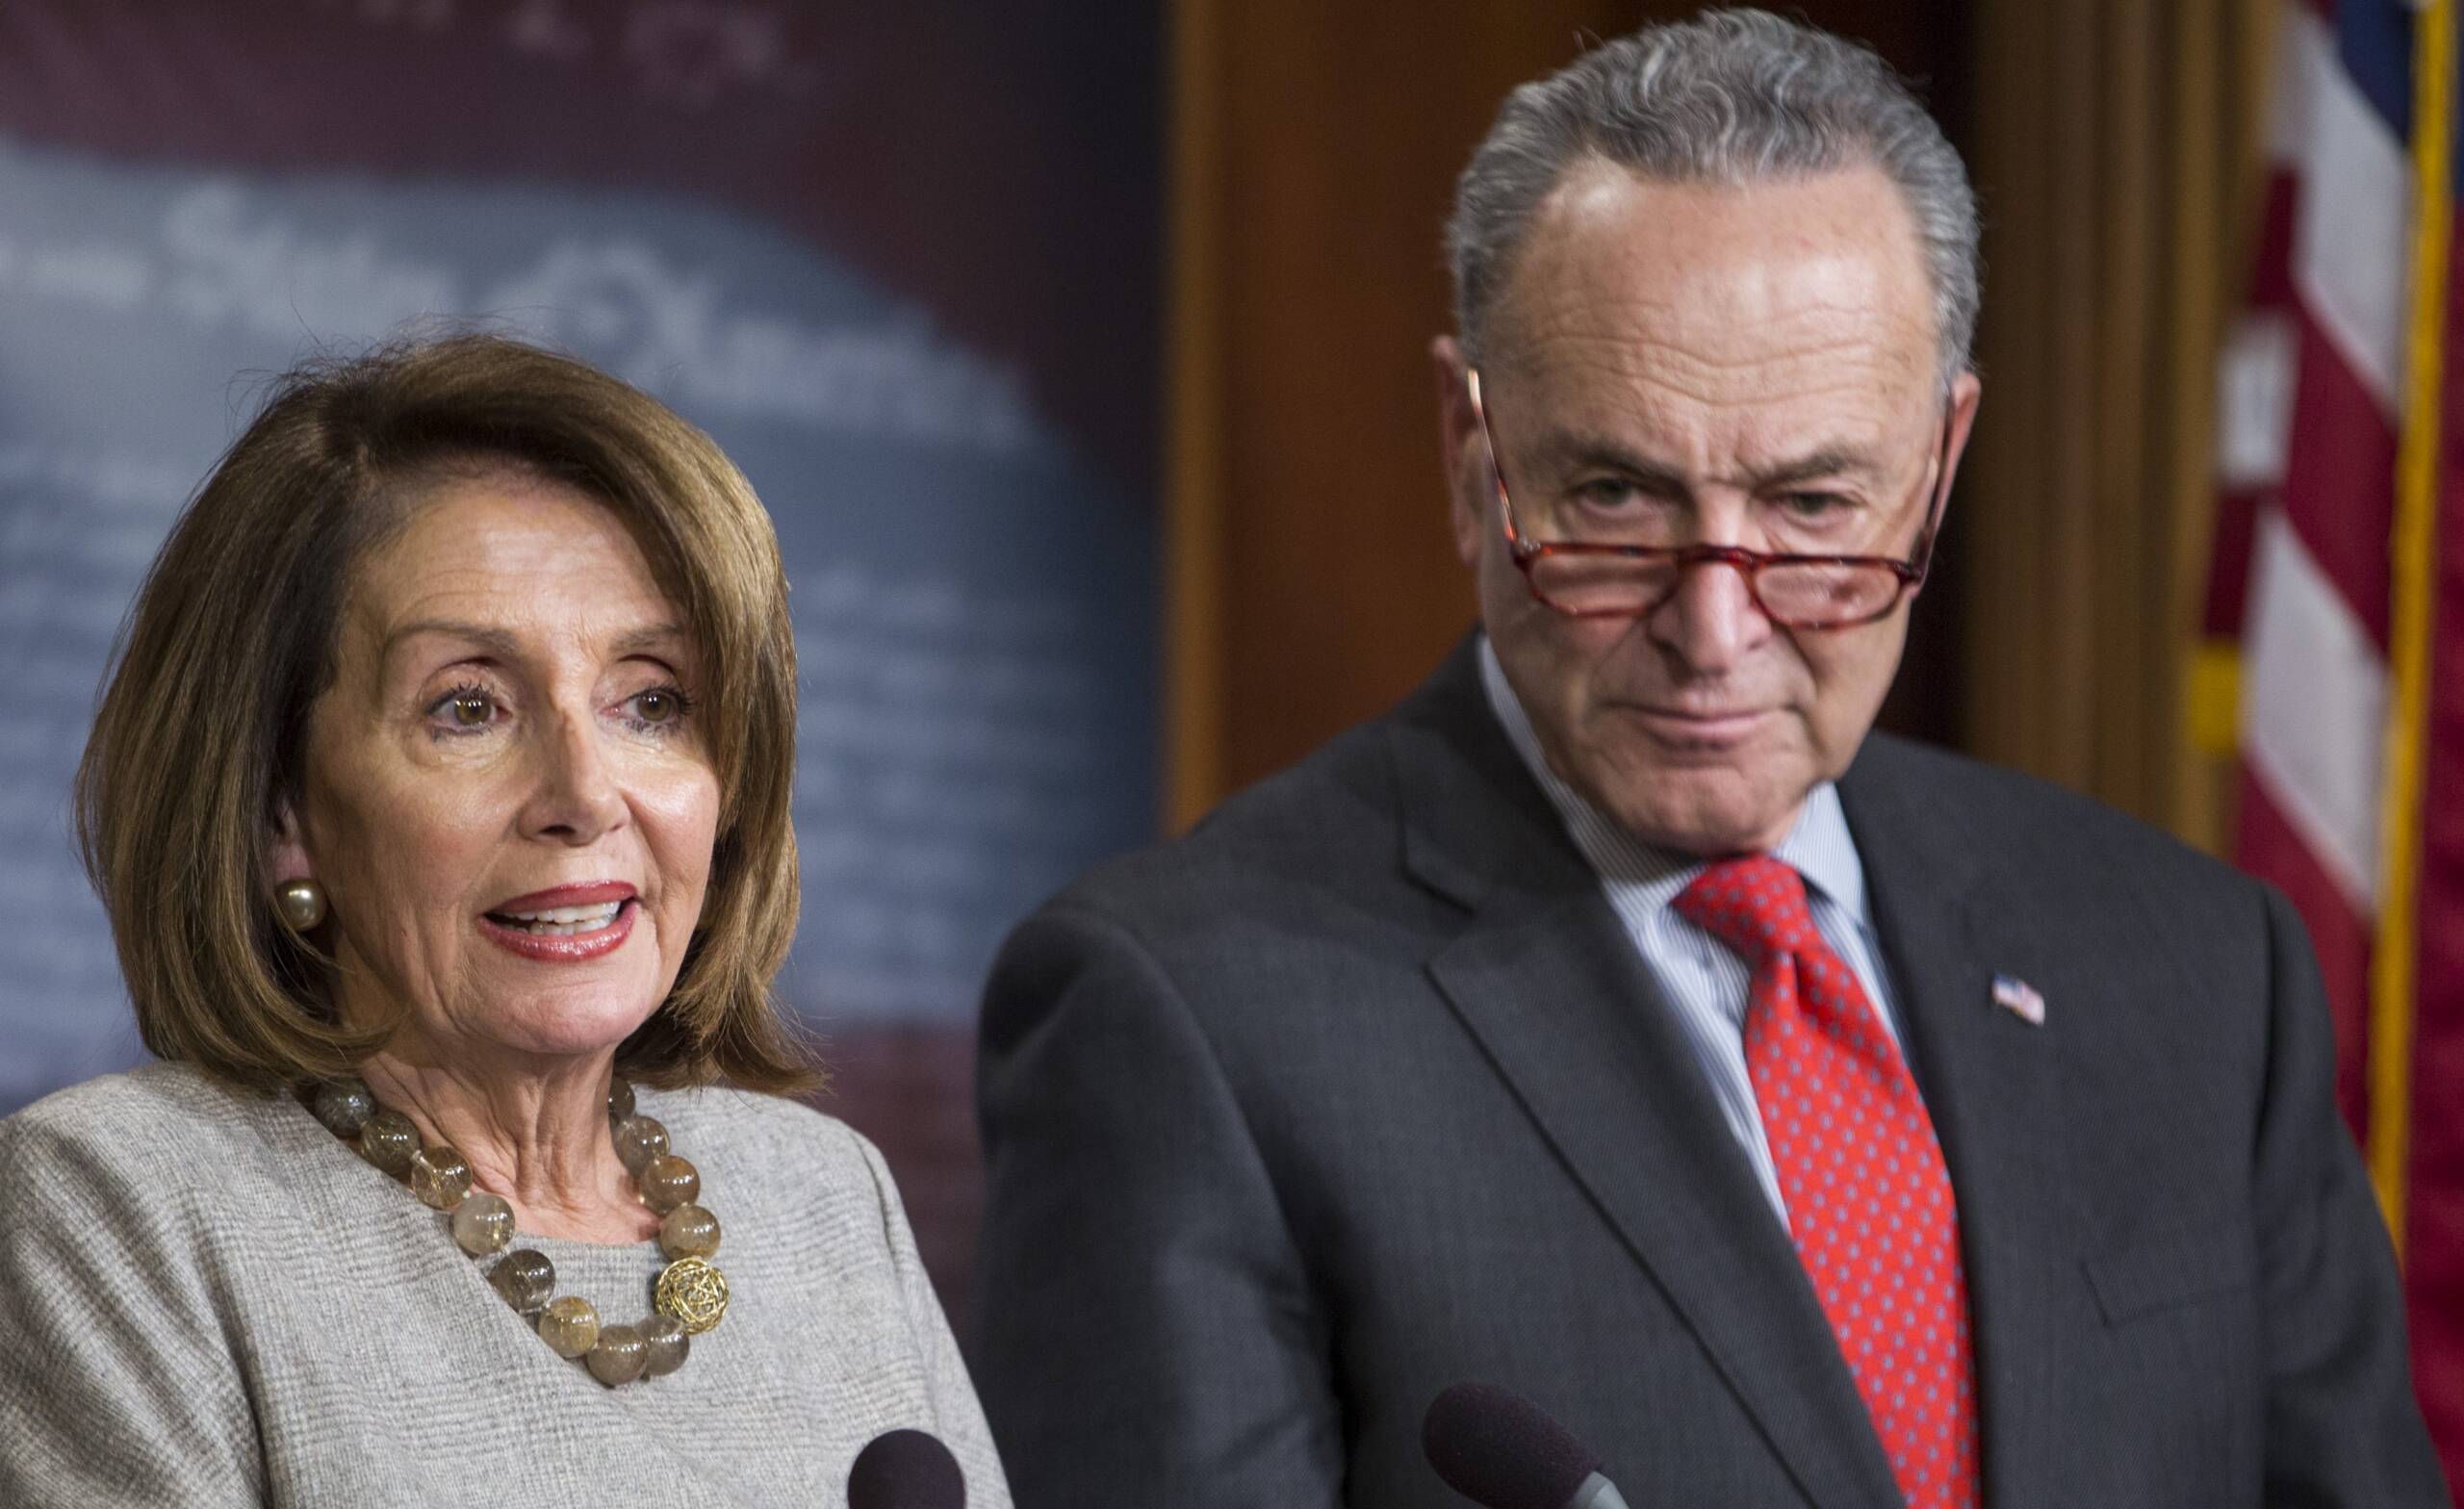 Grover Norquist: Pelosi, Schumer priorities – here’s how free speech, fair elections and more at risk